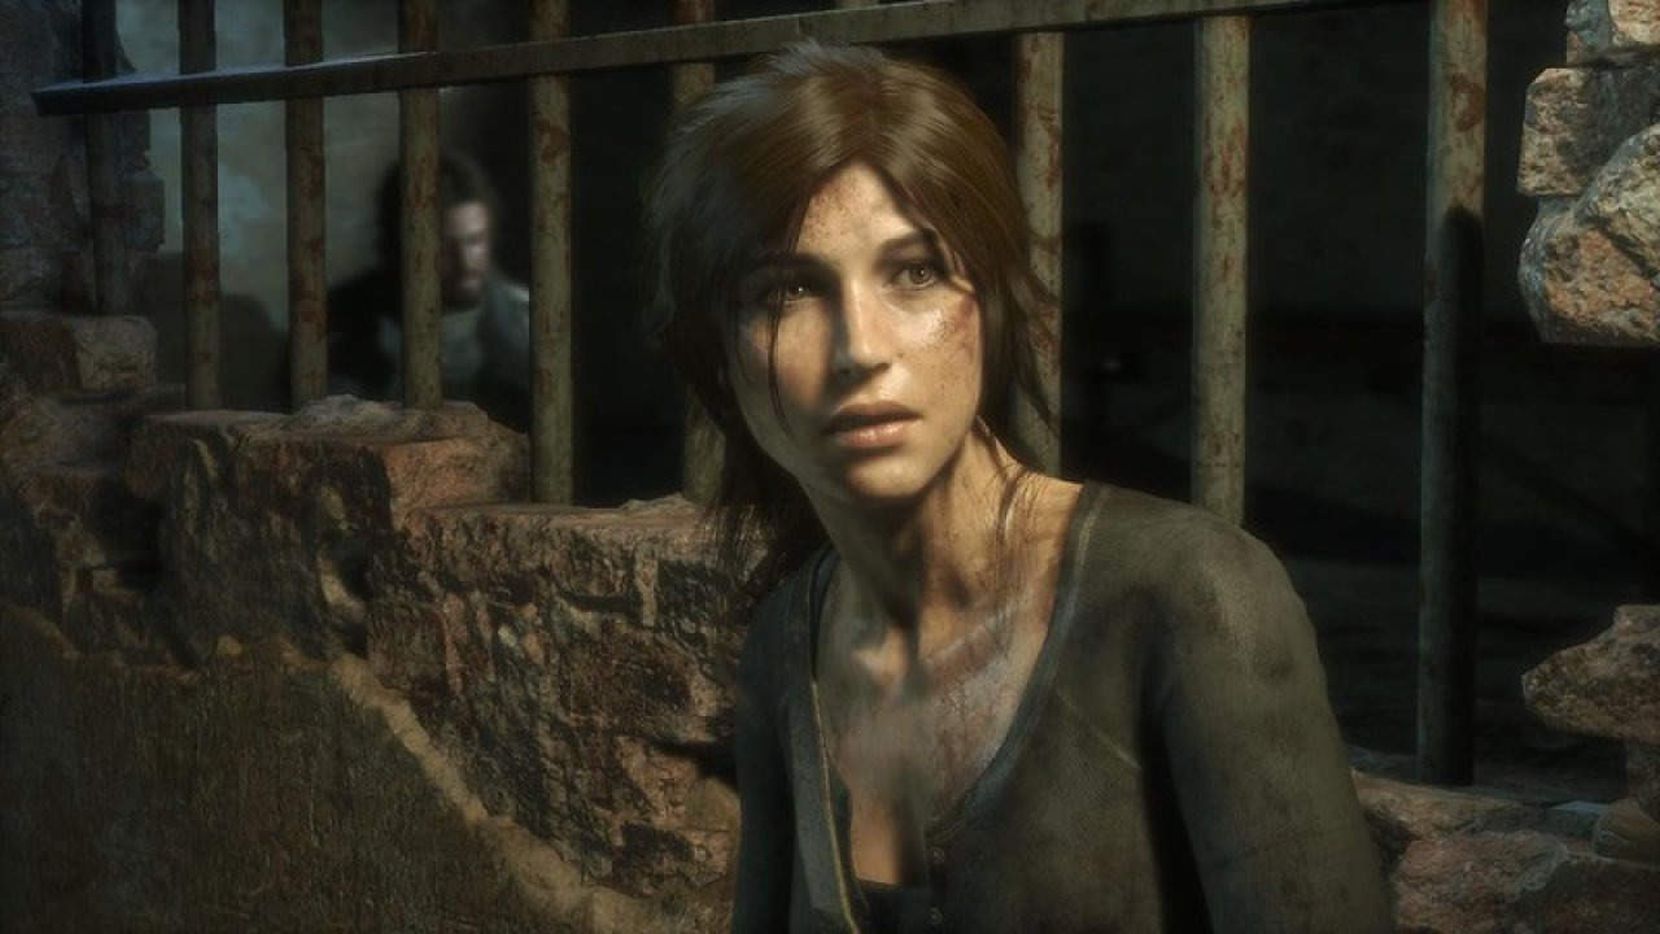 rise of the tomb raider pc version